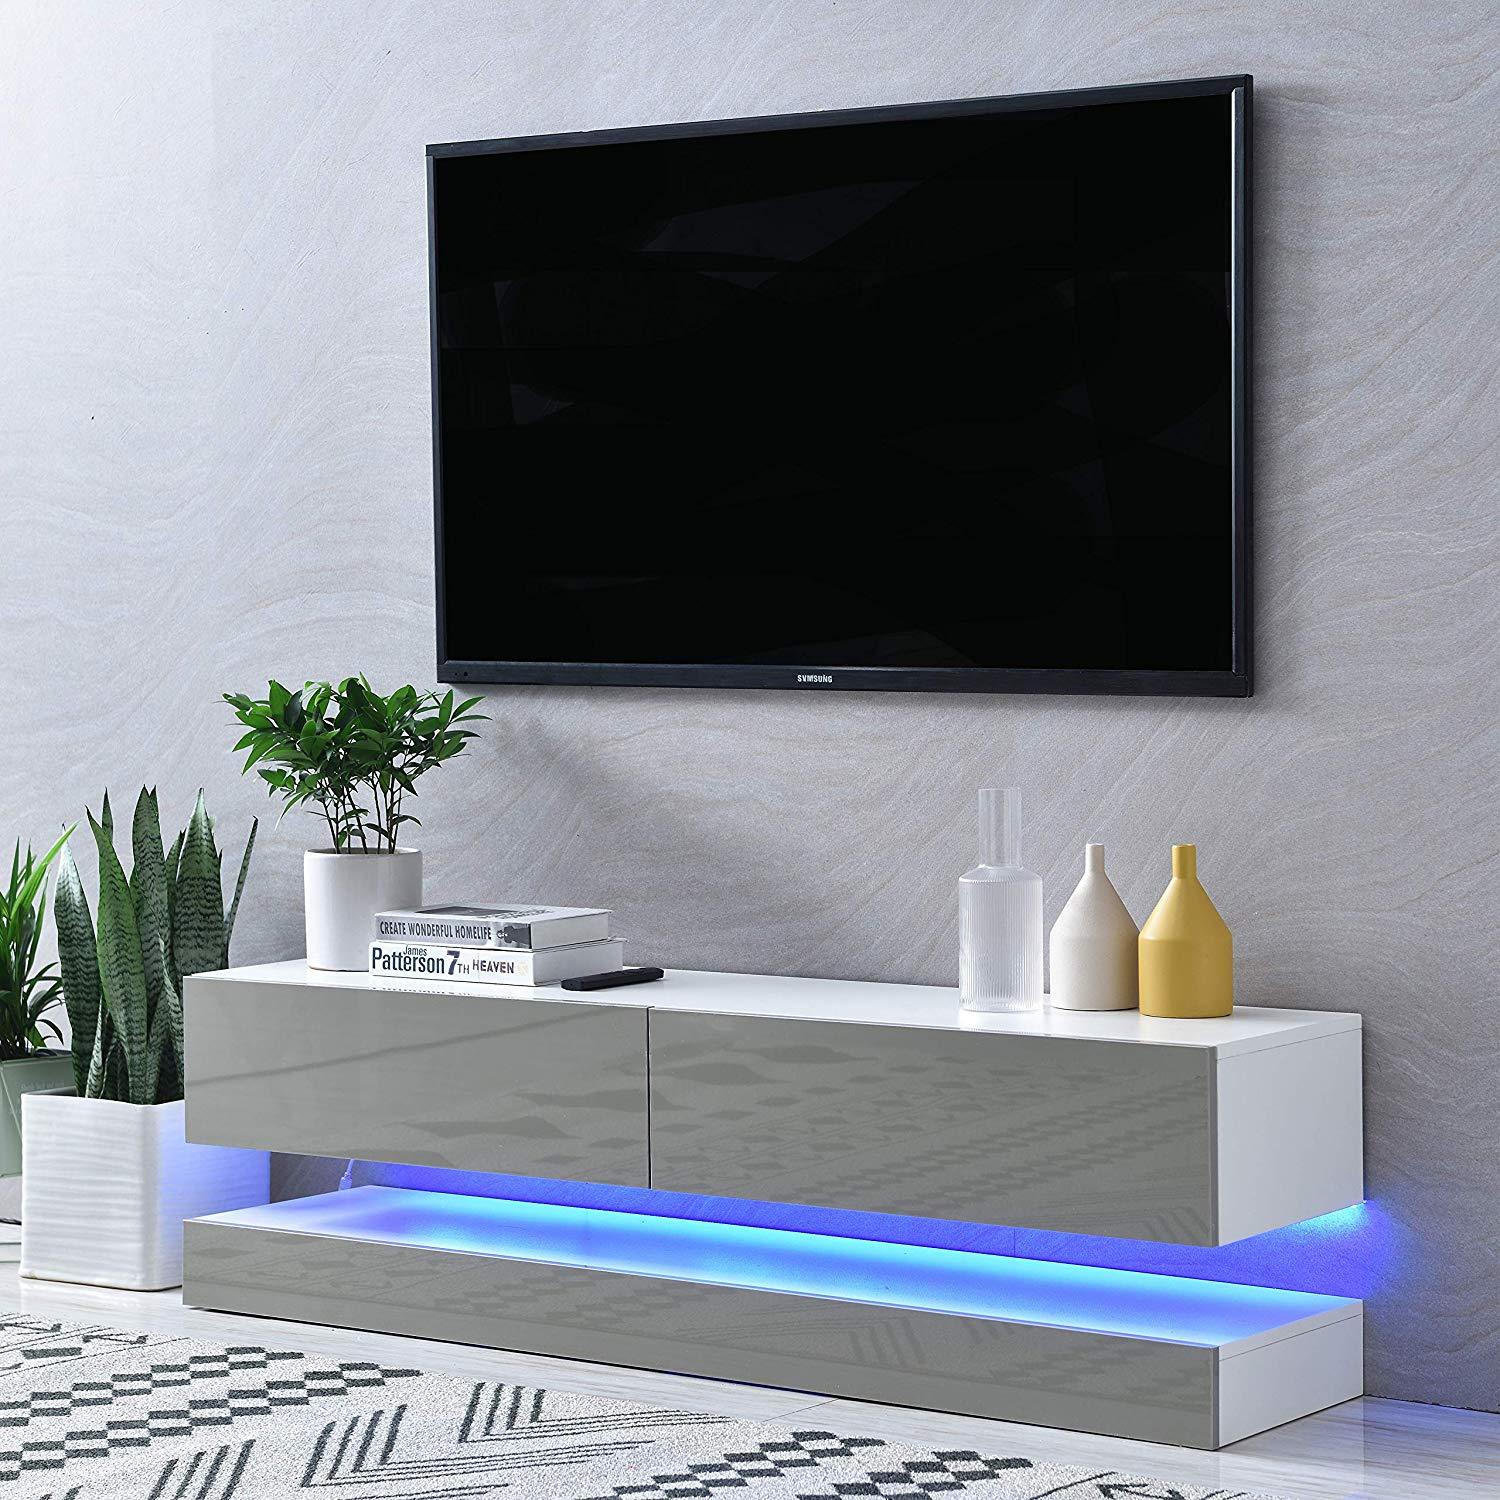 Cherry Tree Furniture MELDAL LED High Gloss TV Stand, TV Unit Cabinet Grey, 138 cm